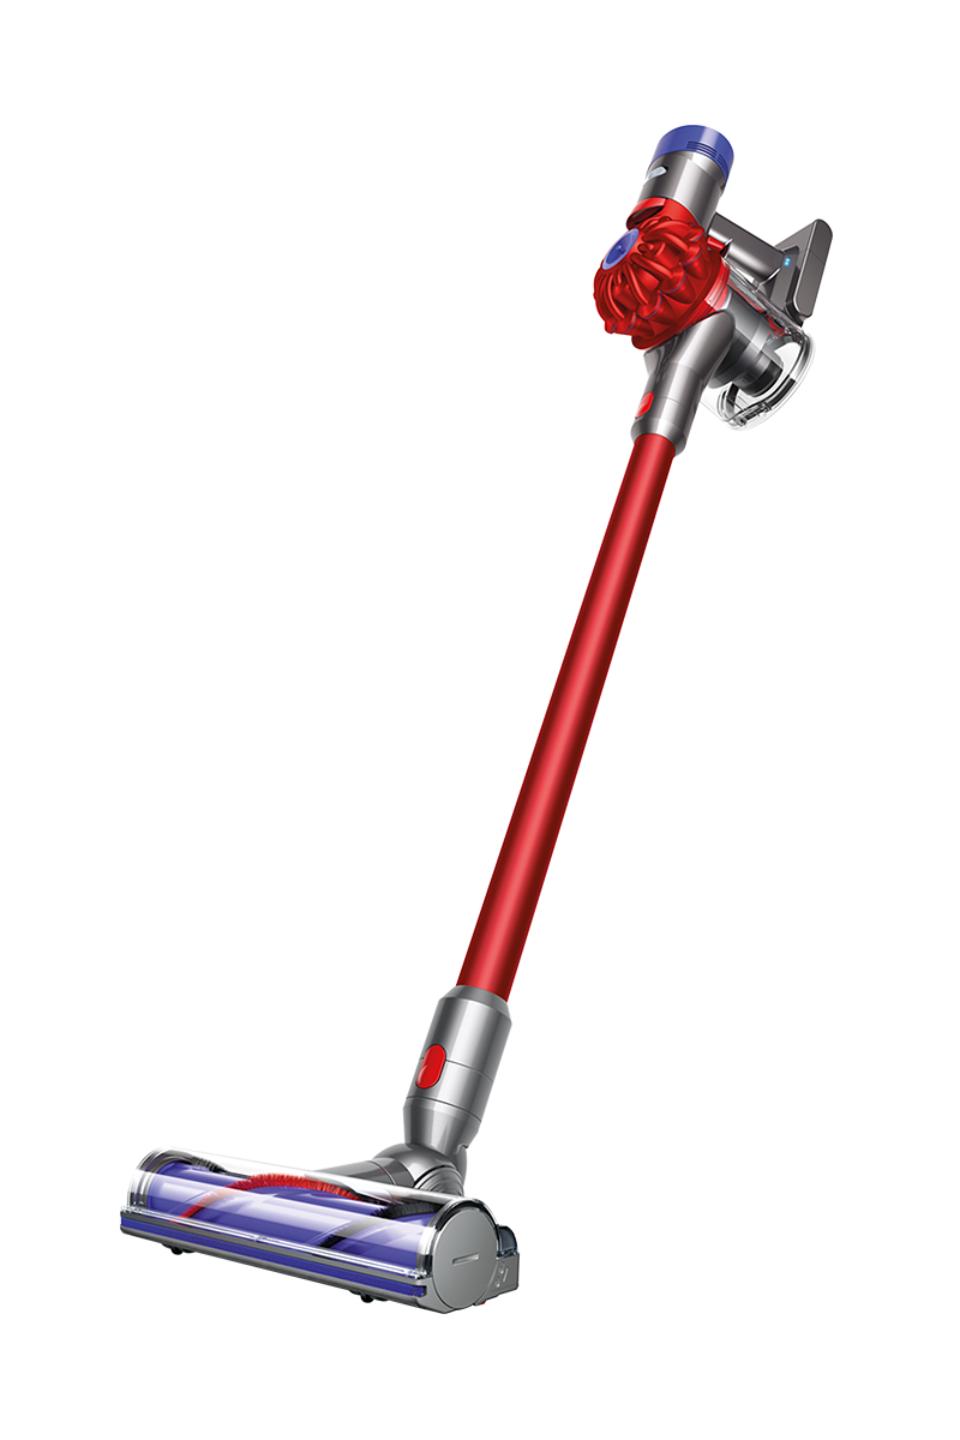 Dyson V8 Origin Cordless NEW - up to 40min running time designed for carpet and hardfloors - Super Vacs Vacuums